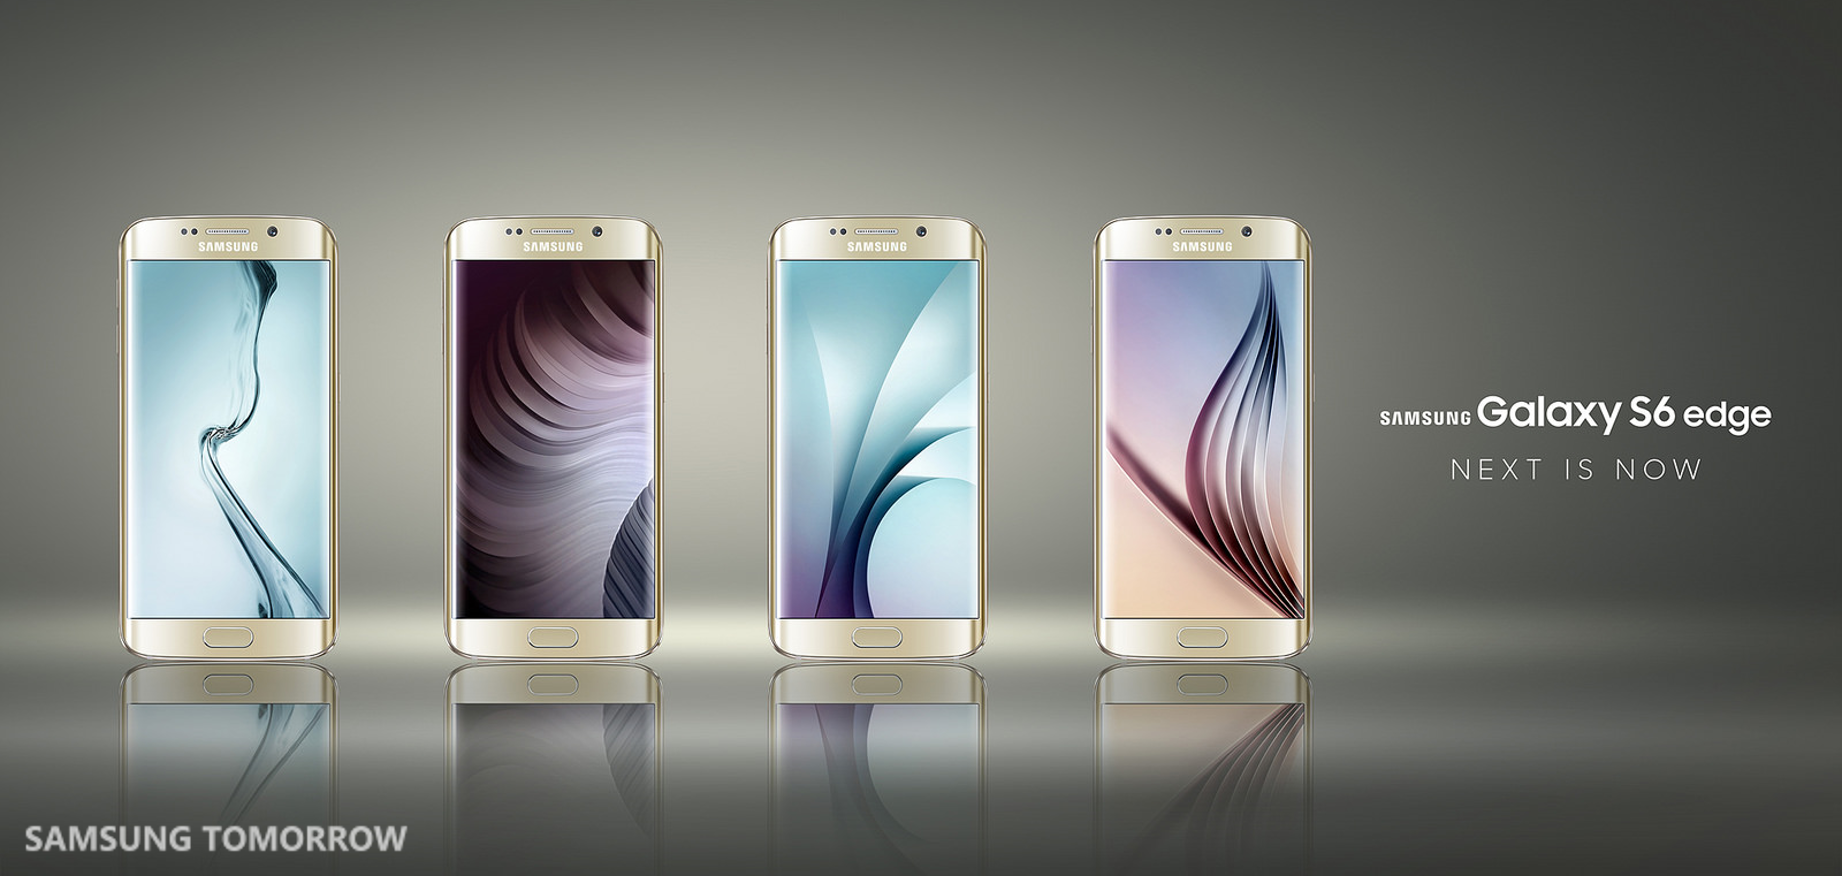 [Updated: Samsung denies] Report claims Samsung paid 500 people to attend Galaxy S6 launch event in China